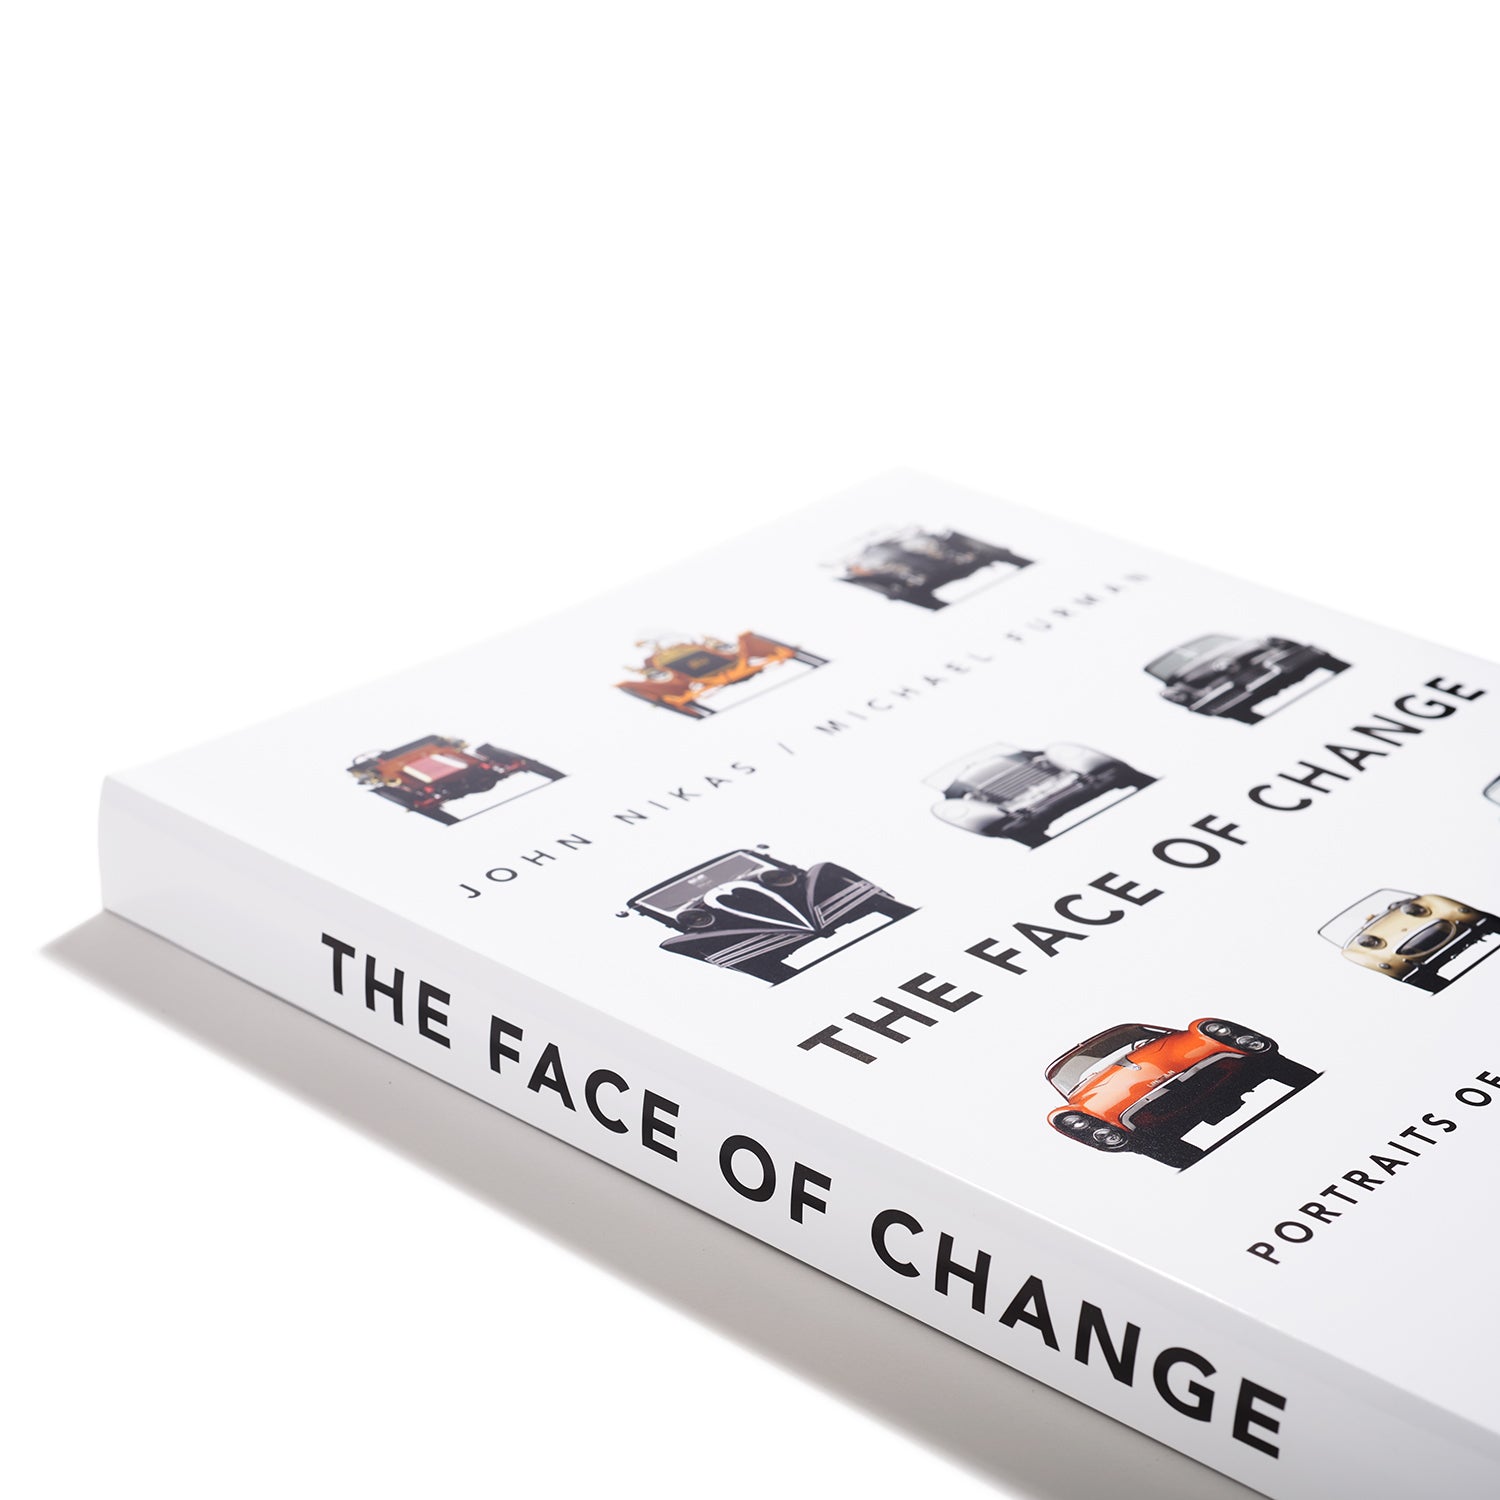 The Face of Change by John Nikas and Michael Furman